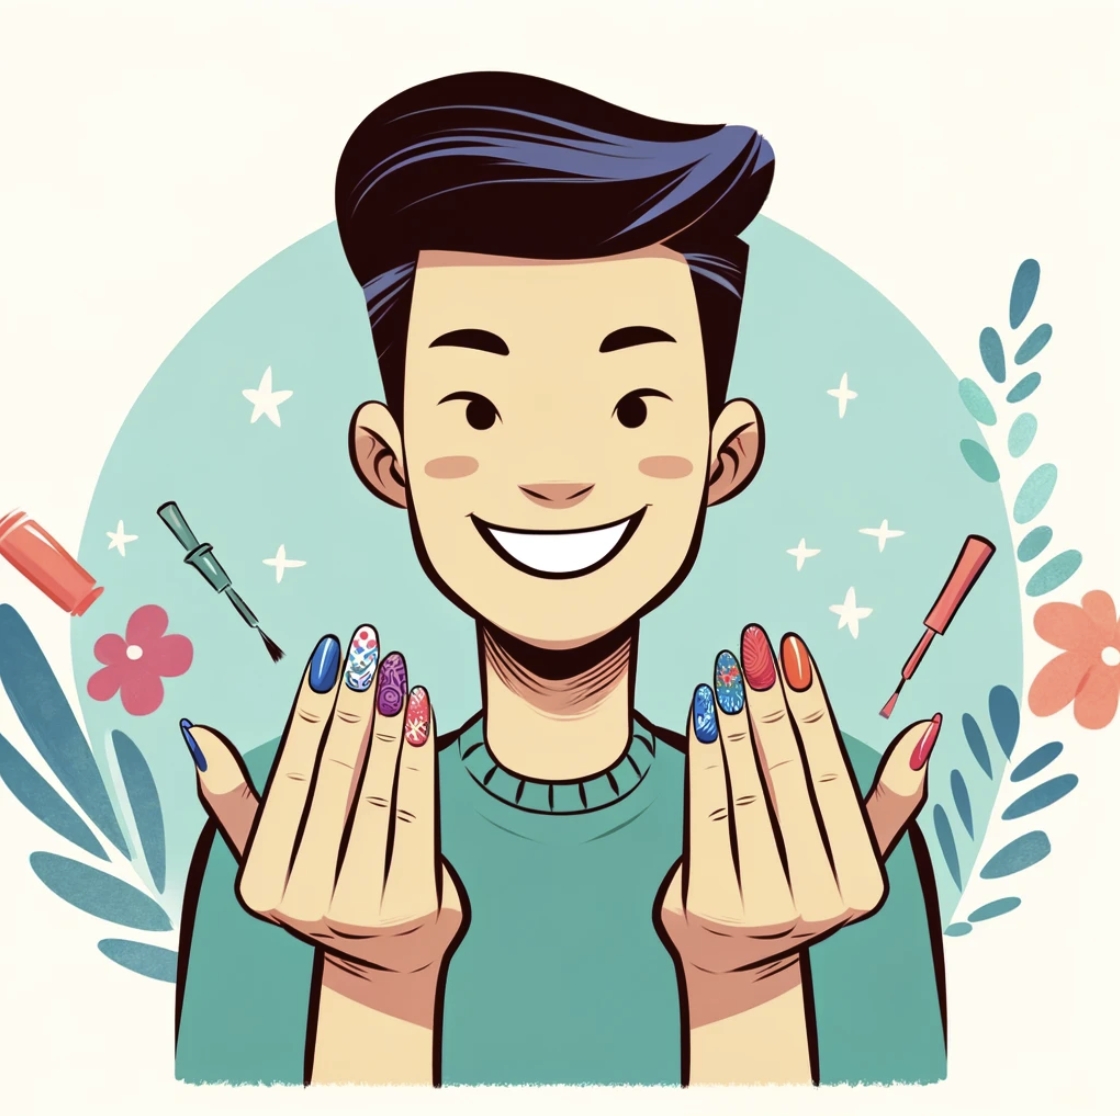 image of a person proudly showing off their beautifully manicured nails, with a joyful and confident expression that highlights the beauty and creativity of their nail art